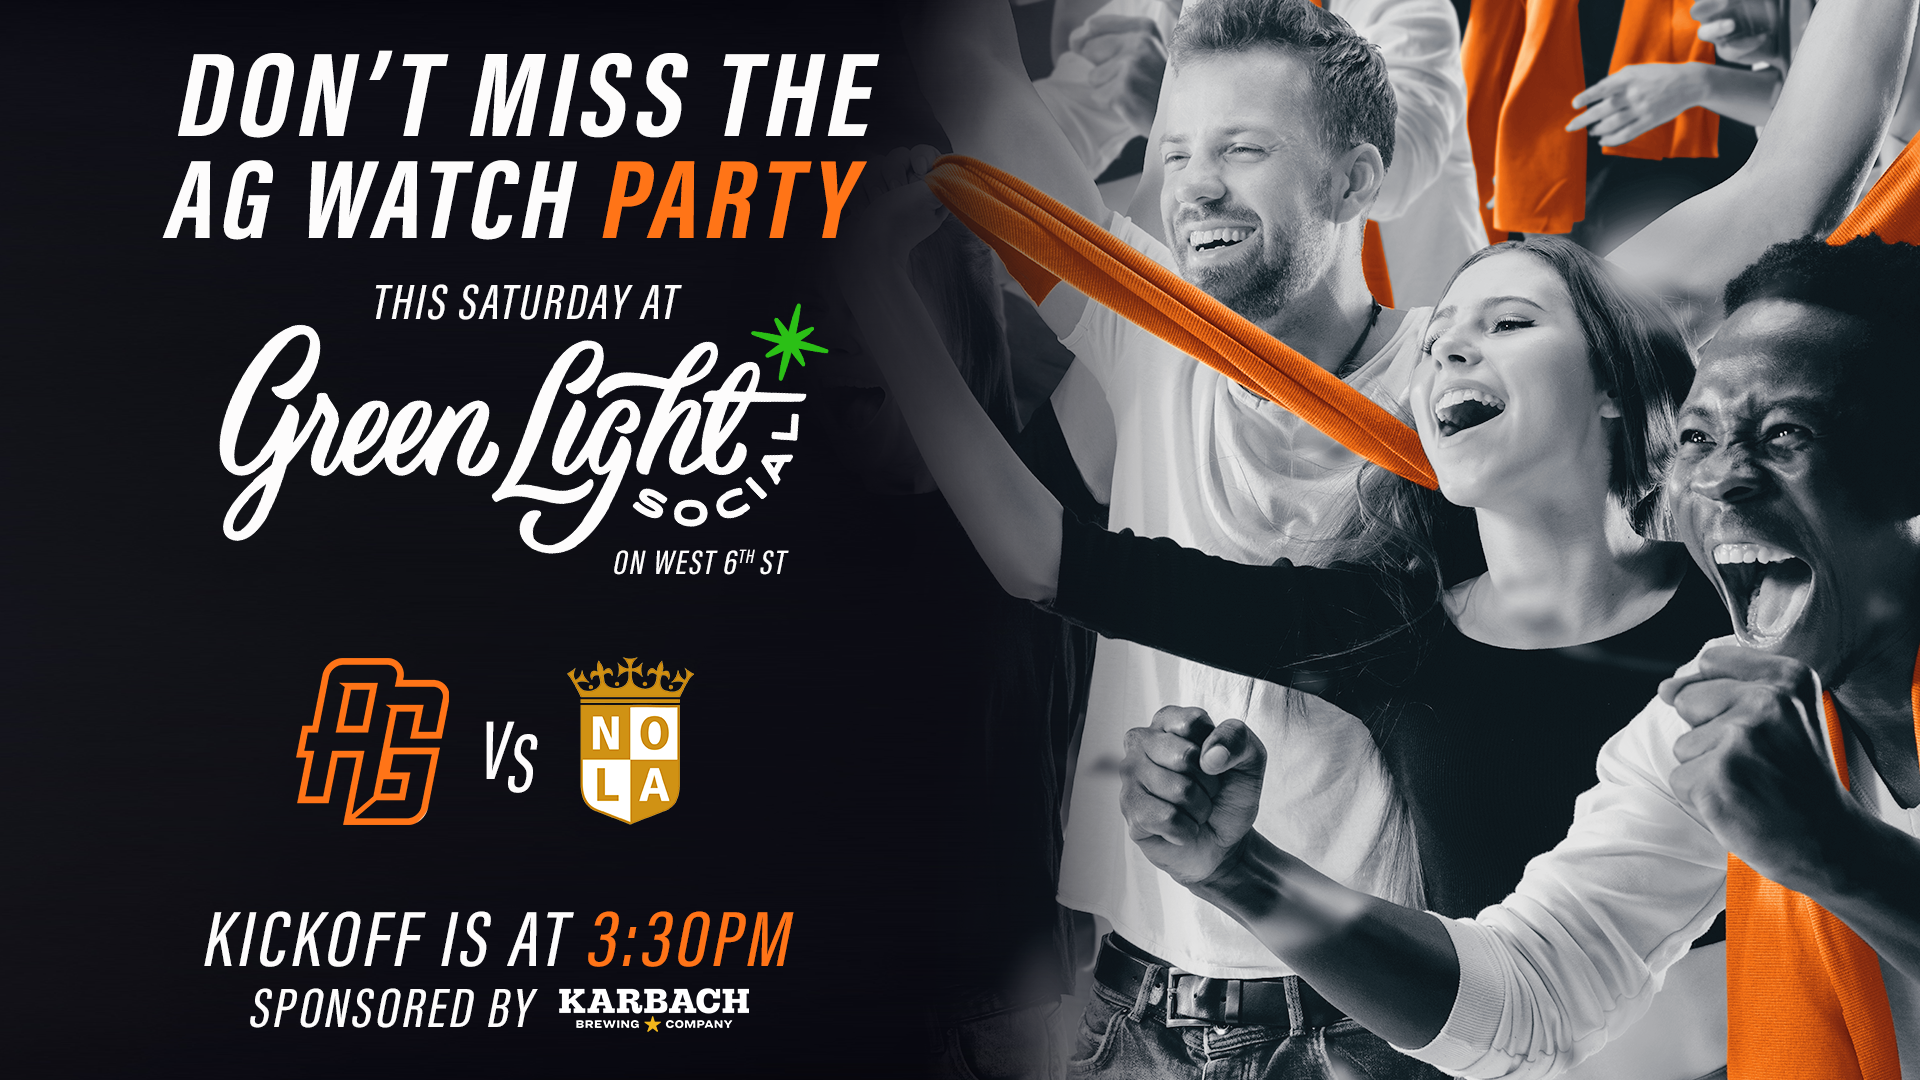 Come Out to The AG Watch Party This Saturday At Greenlight Social